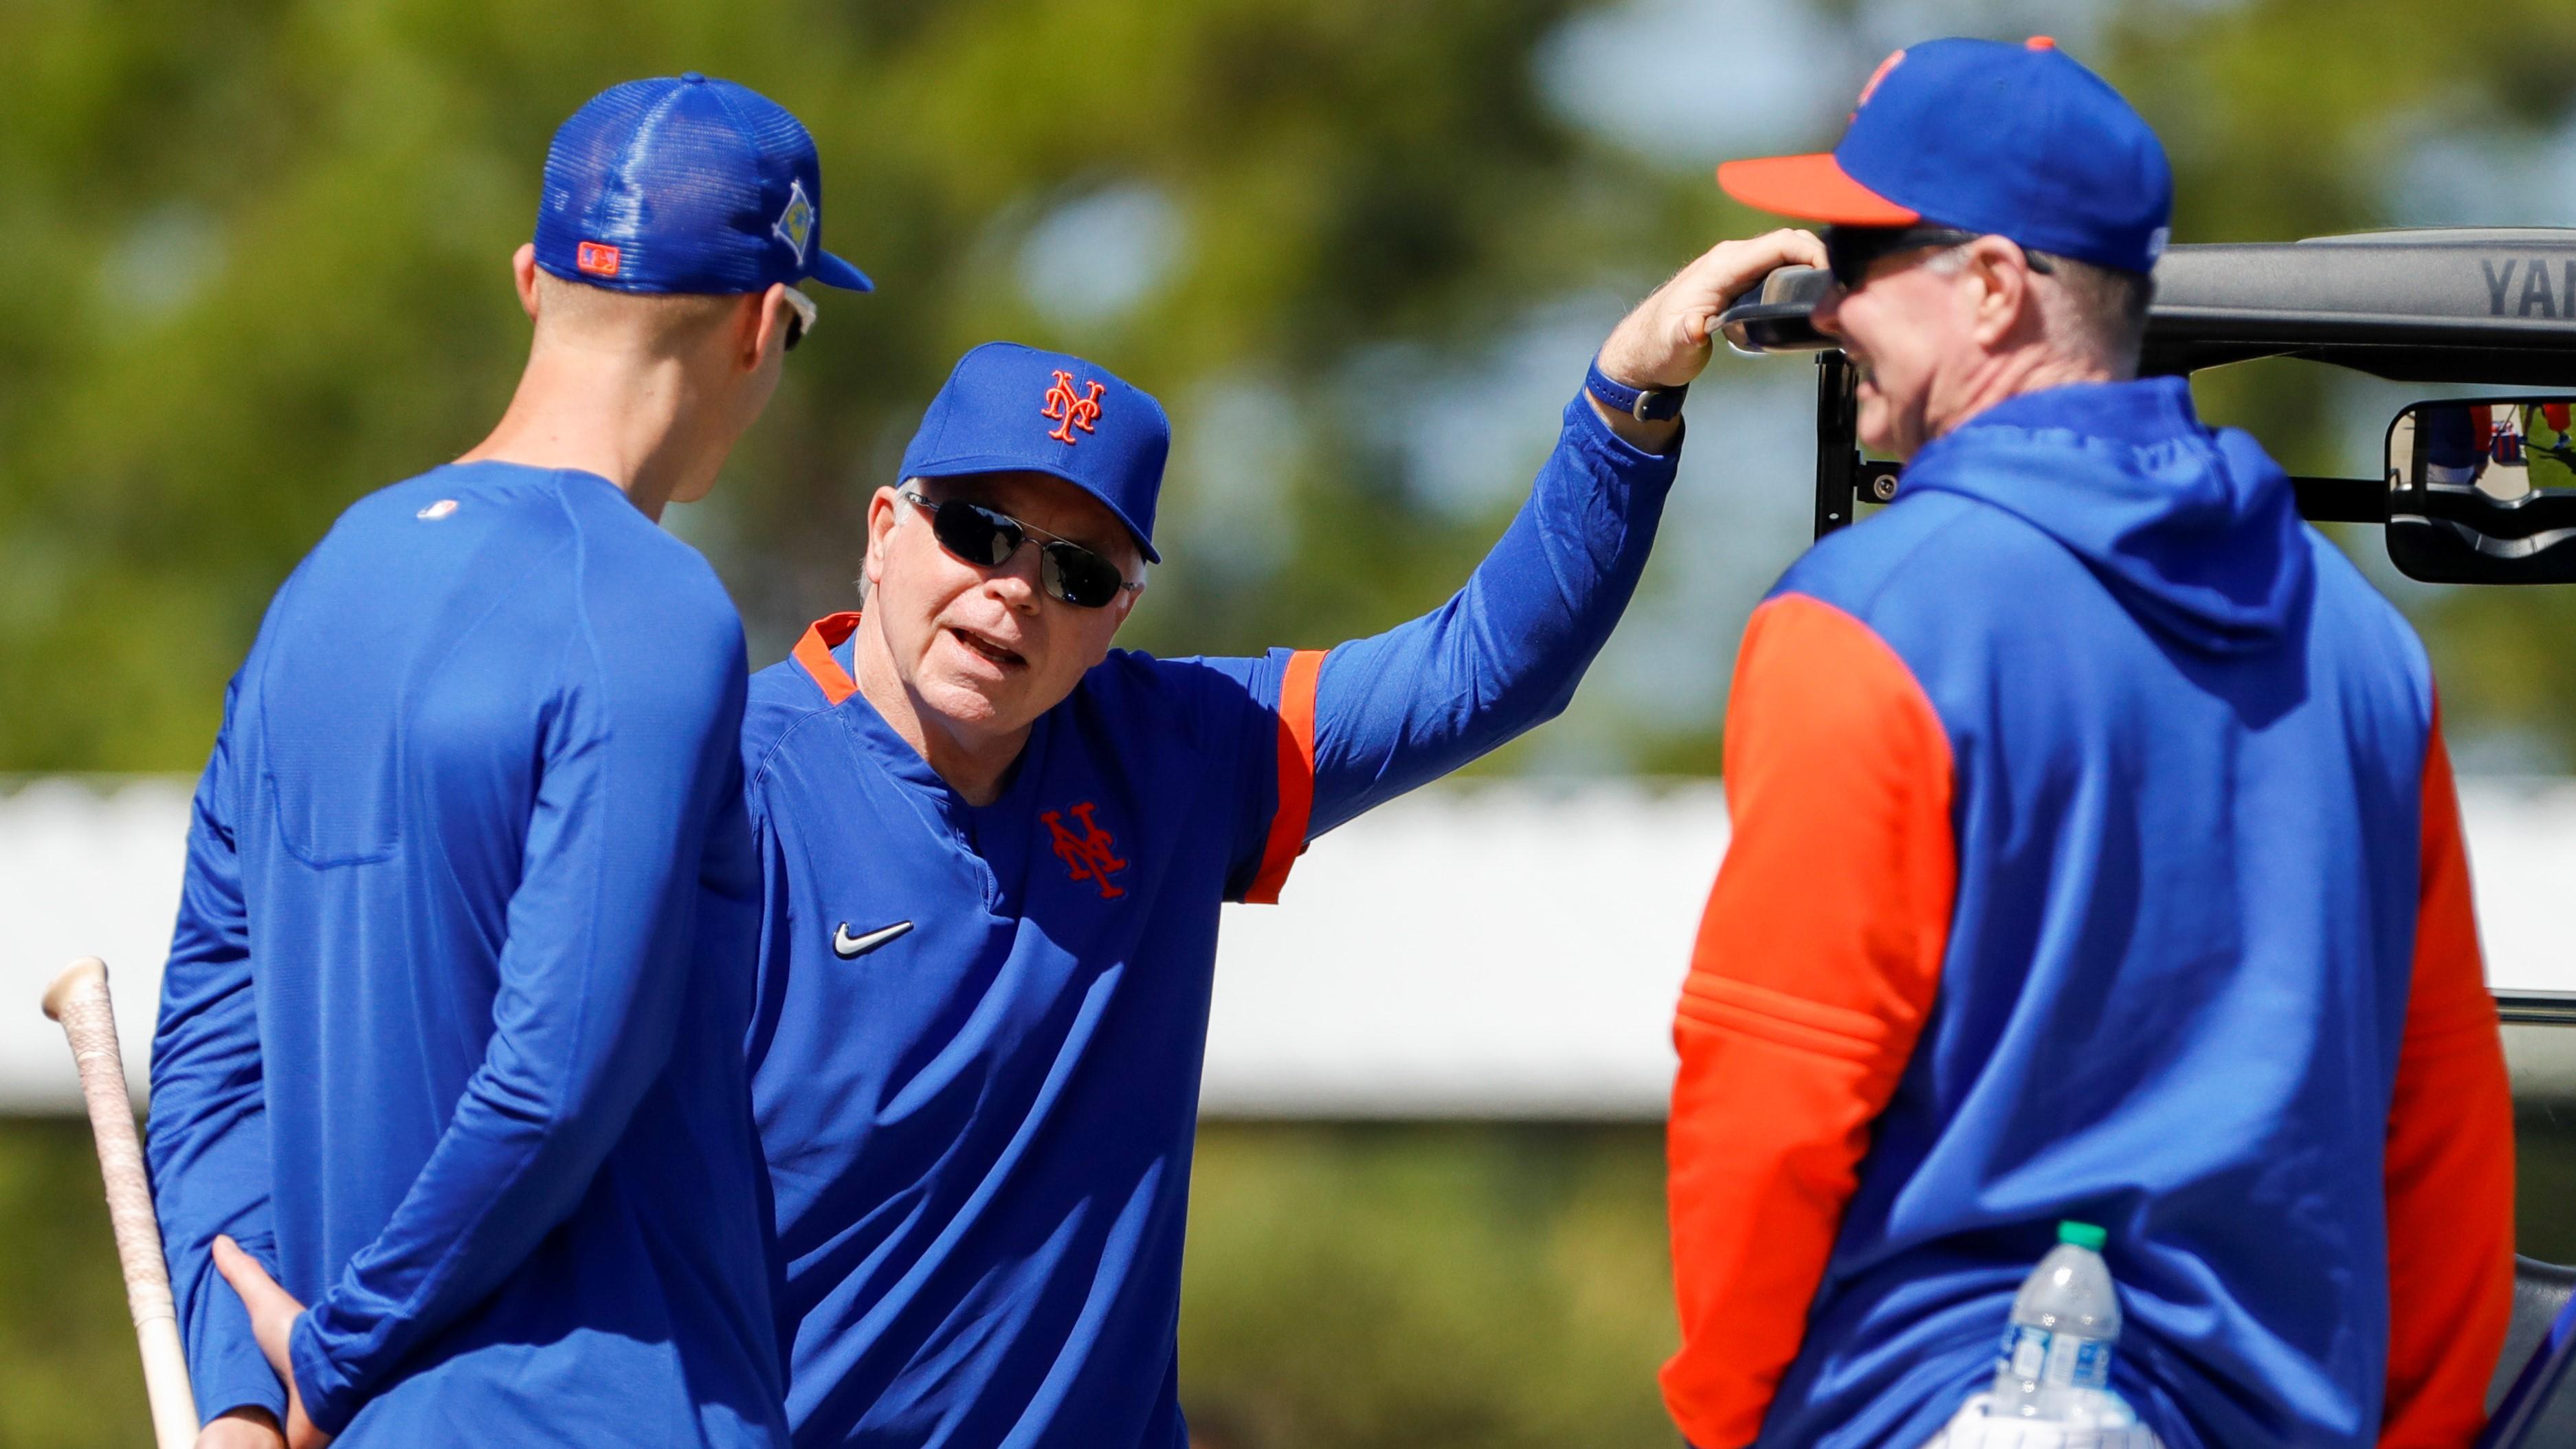 Mar 13, 2022; Port St. Lucie, FL, USA; New York Mets manager Buck Showalter (middle) talks to outfielder Mark Canha (left) and bench coach Glenn Sherlock after a workout during spring training. / Sam Navarro-USA TODAY Sports